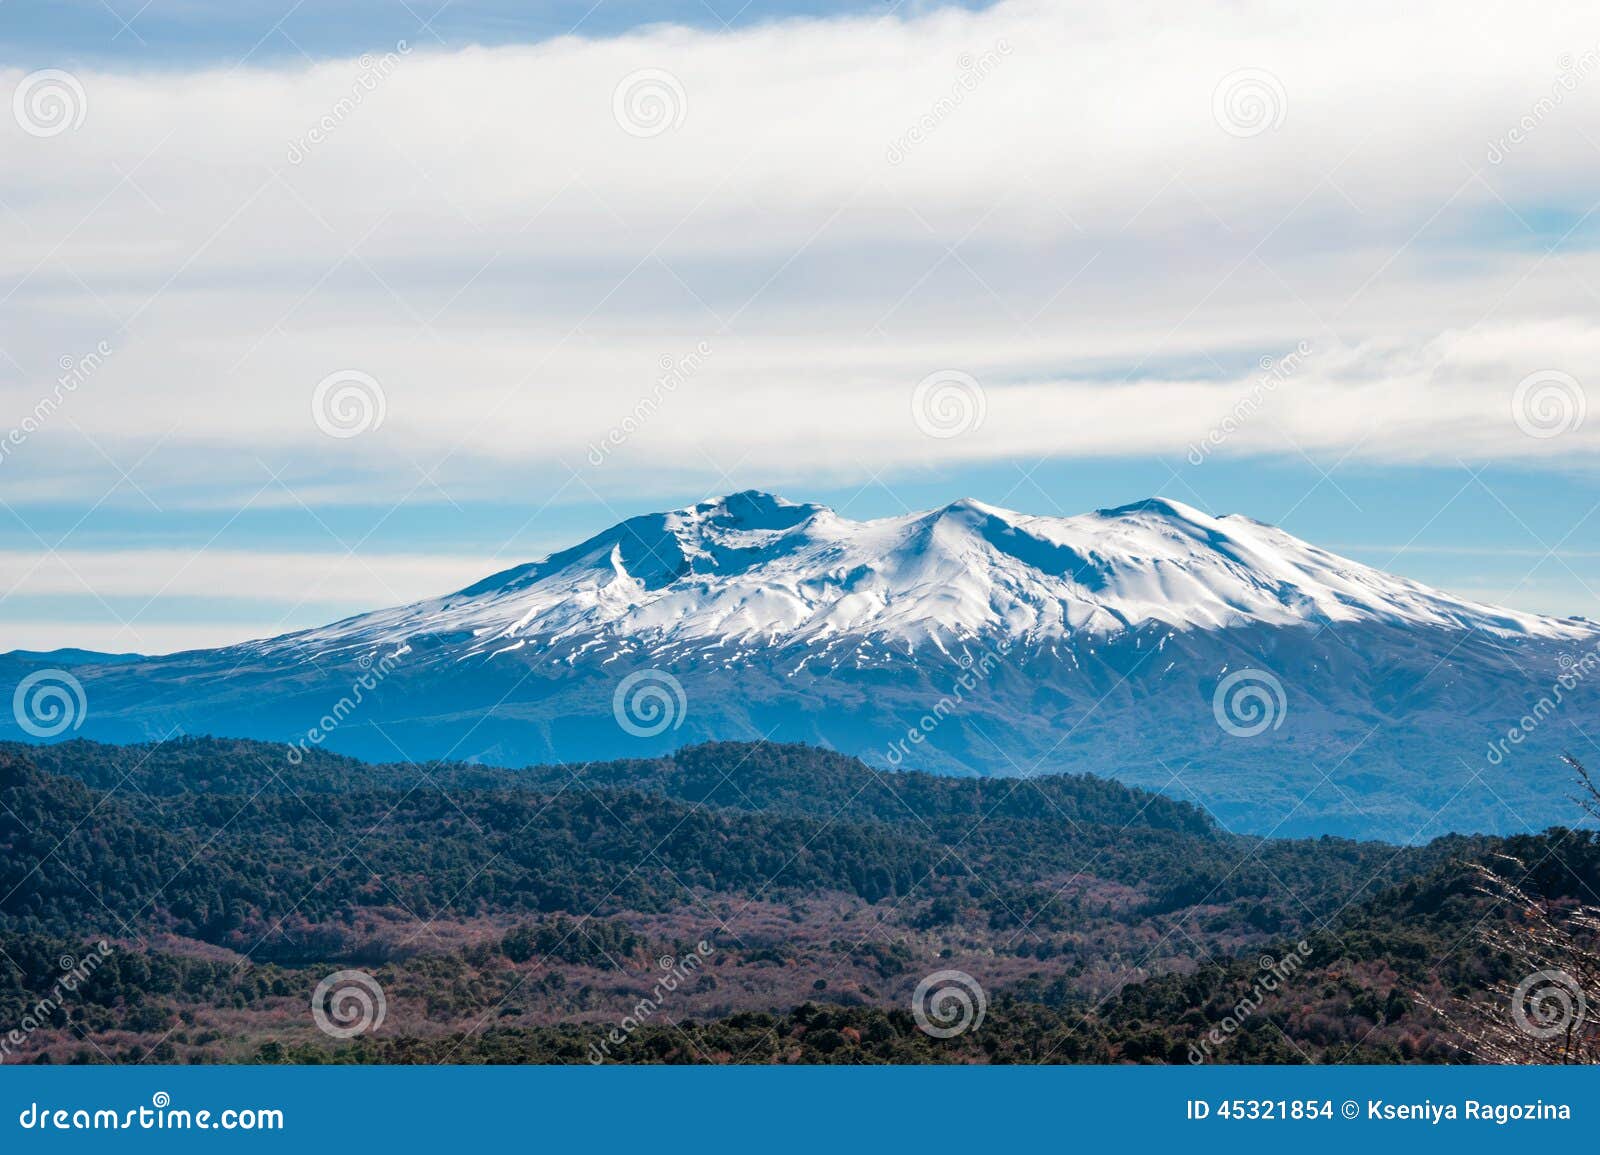 tronador stratovolcano in the southern andes